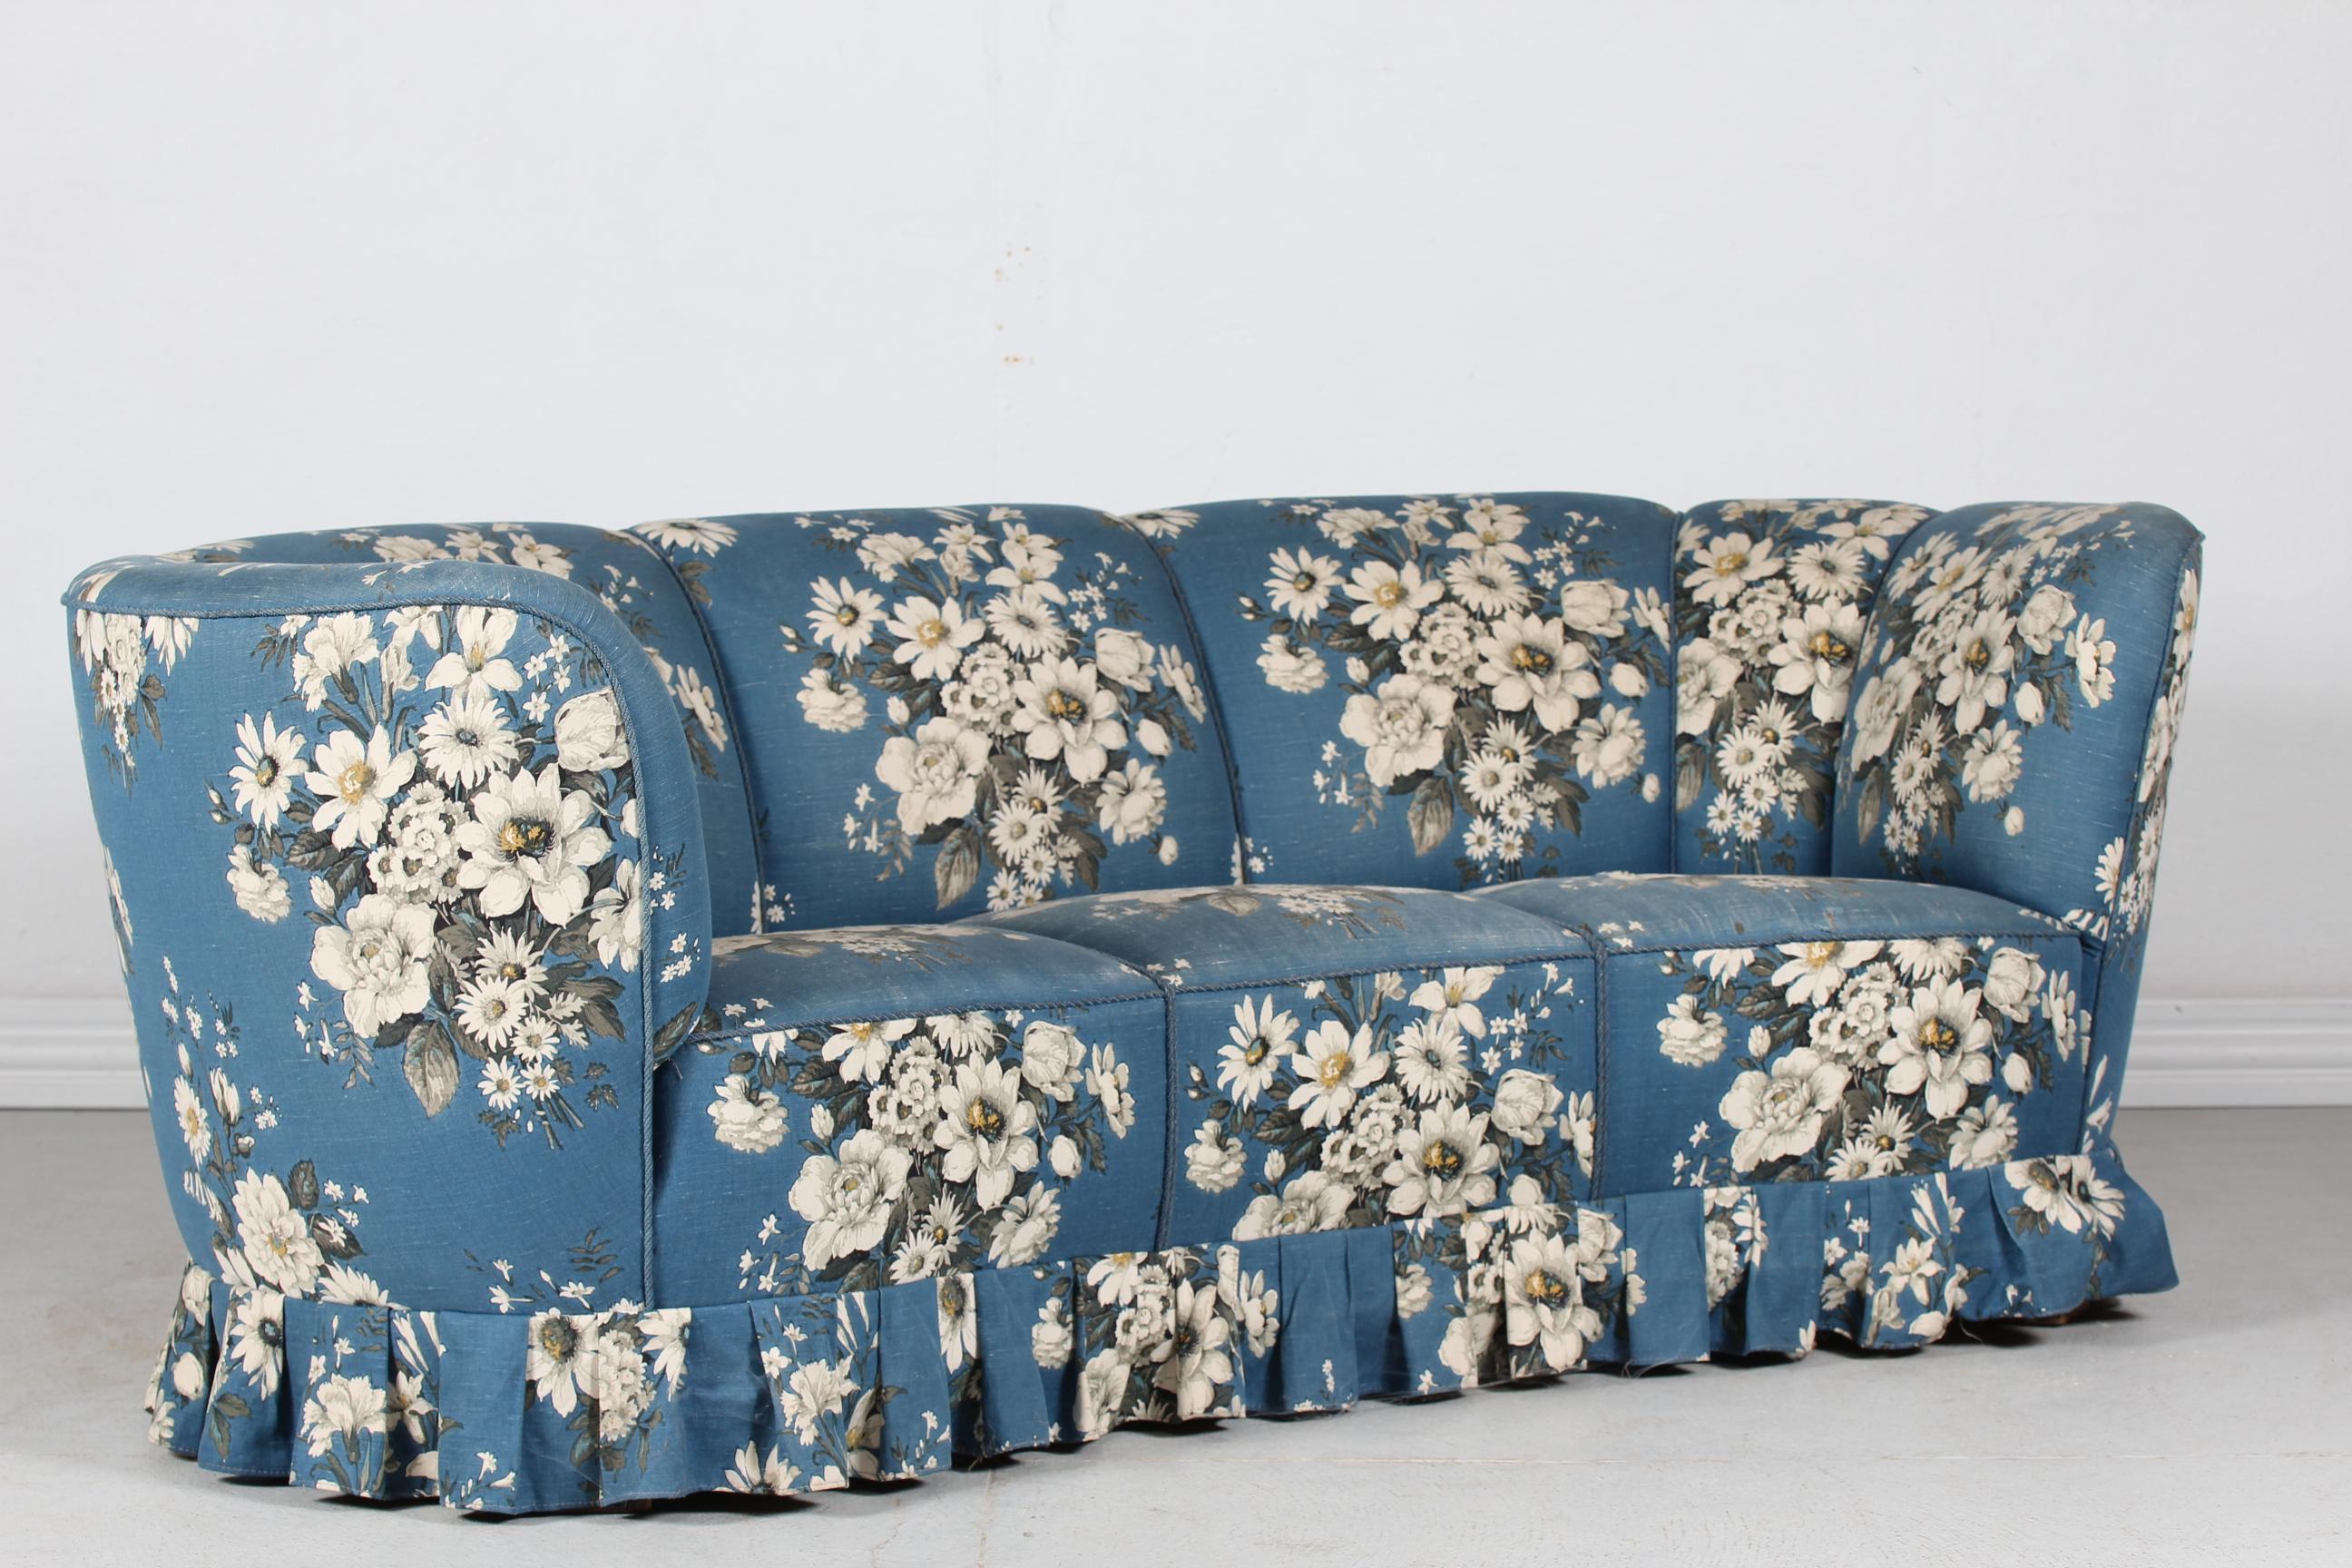 Curved couch or sofa in Fritz Hansen style from the 1940´s.
The feets are made of dark stained beech wood and the sofa is upholstered with floral fabric in blue and white colors.
Made by Danish cabinet maker in the 1940s.

The couch frame